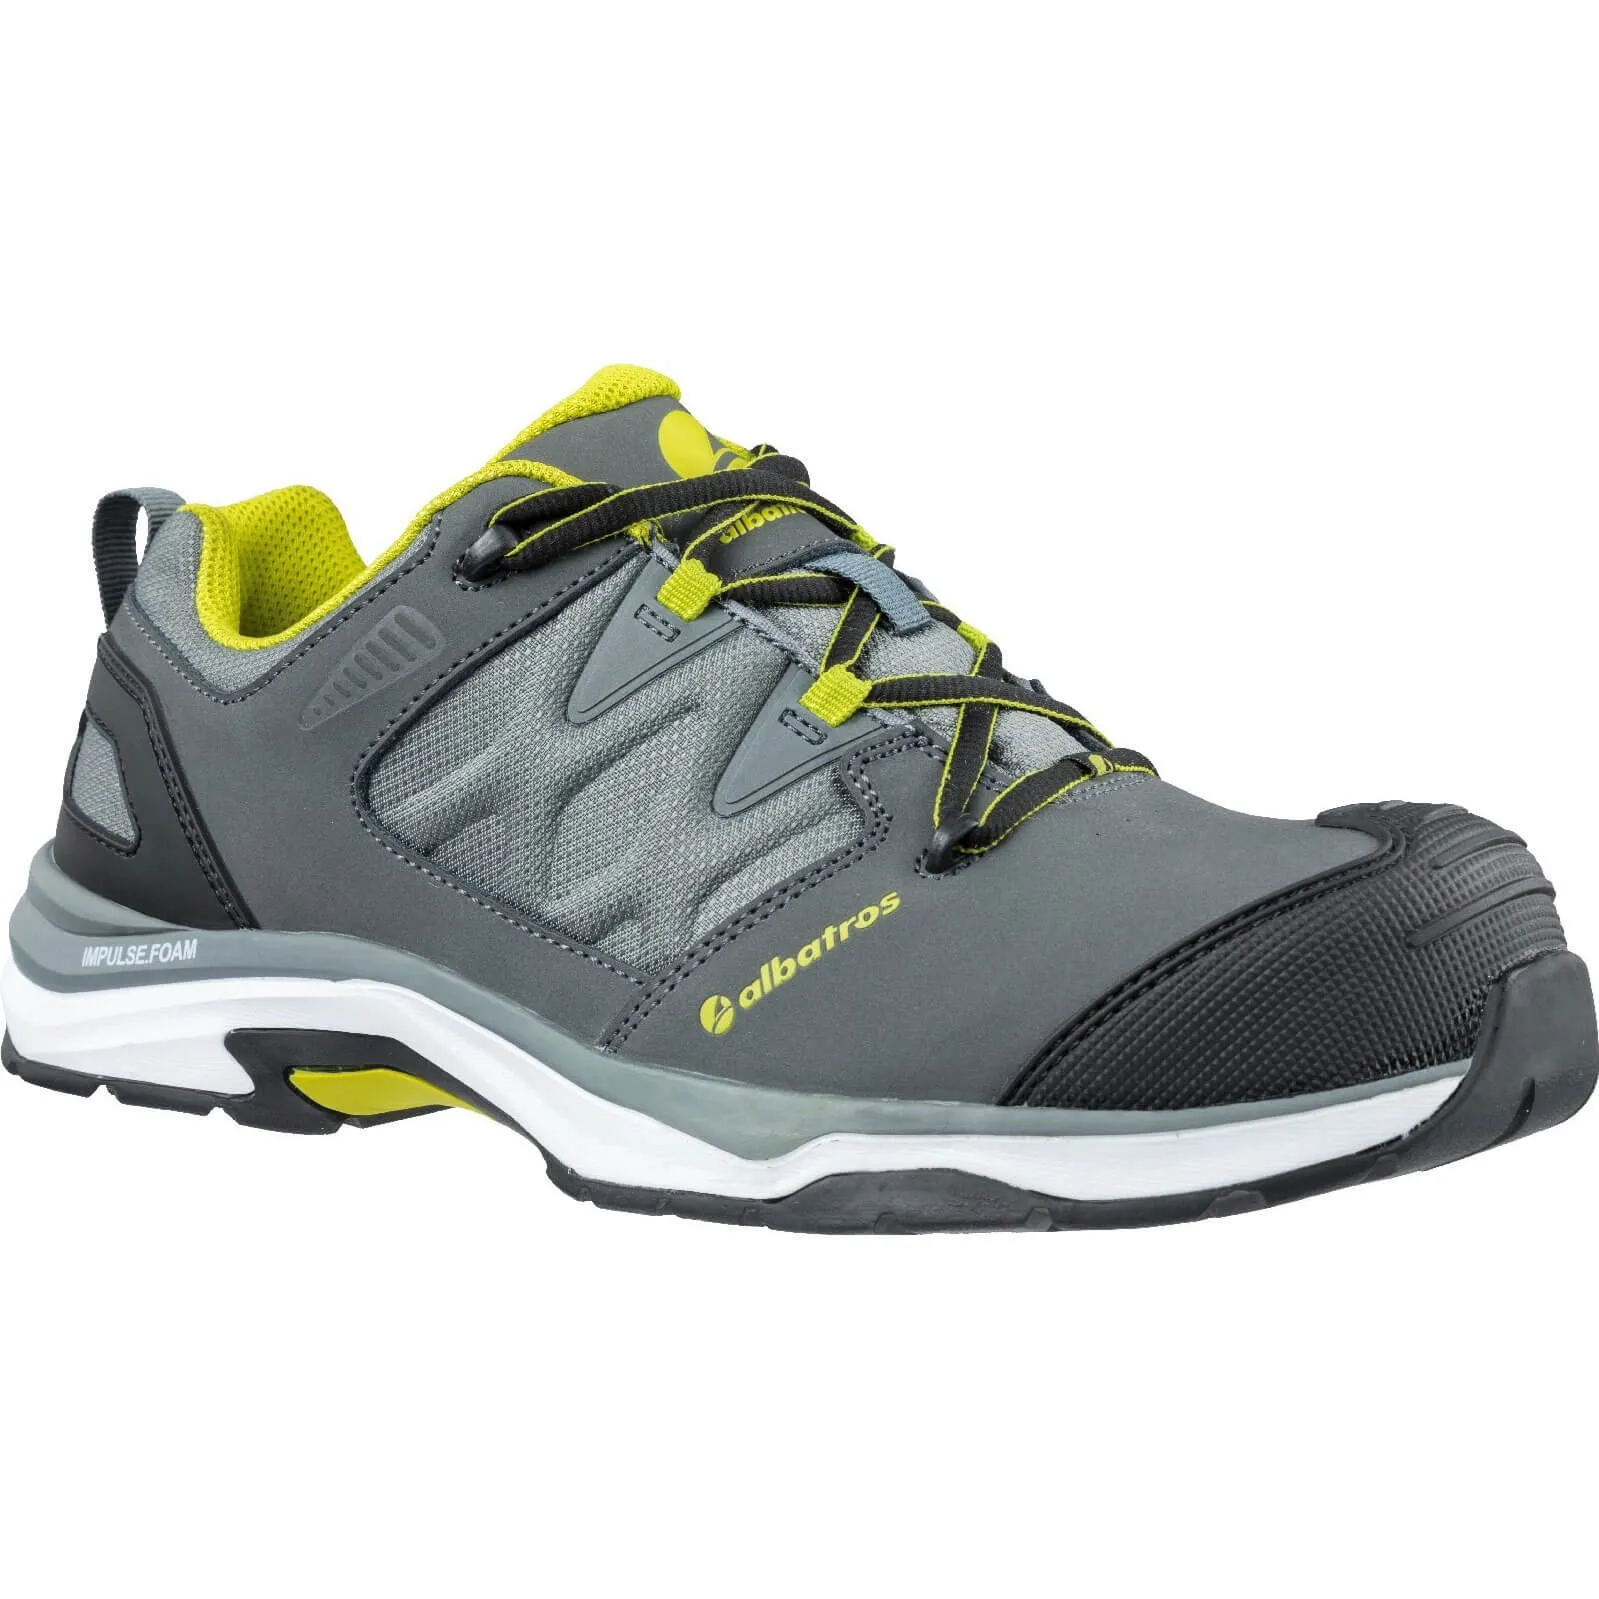 Albatros Ultratrail Low Lace Up Safety Shoe - Grey, Size 12